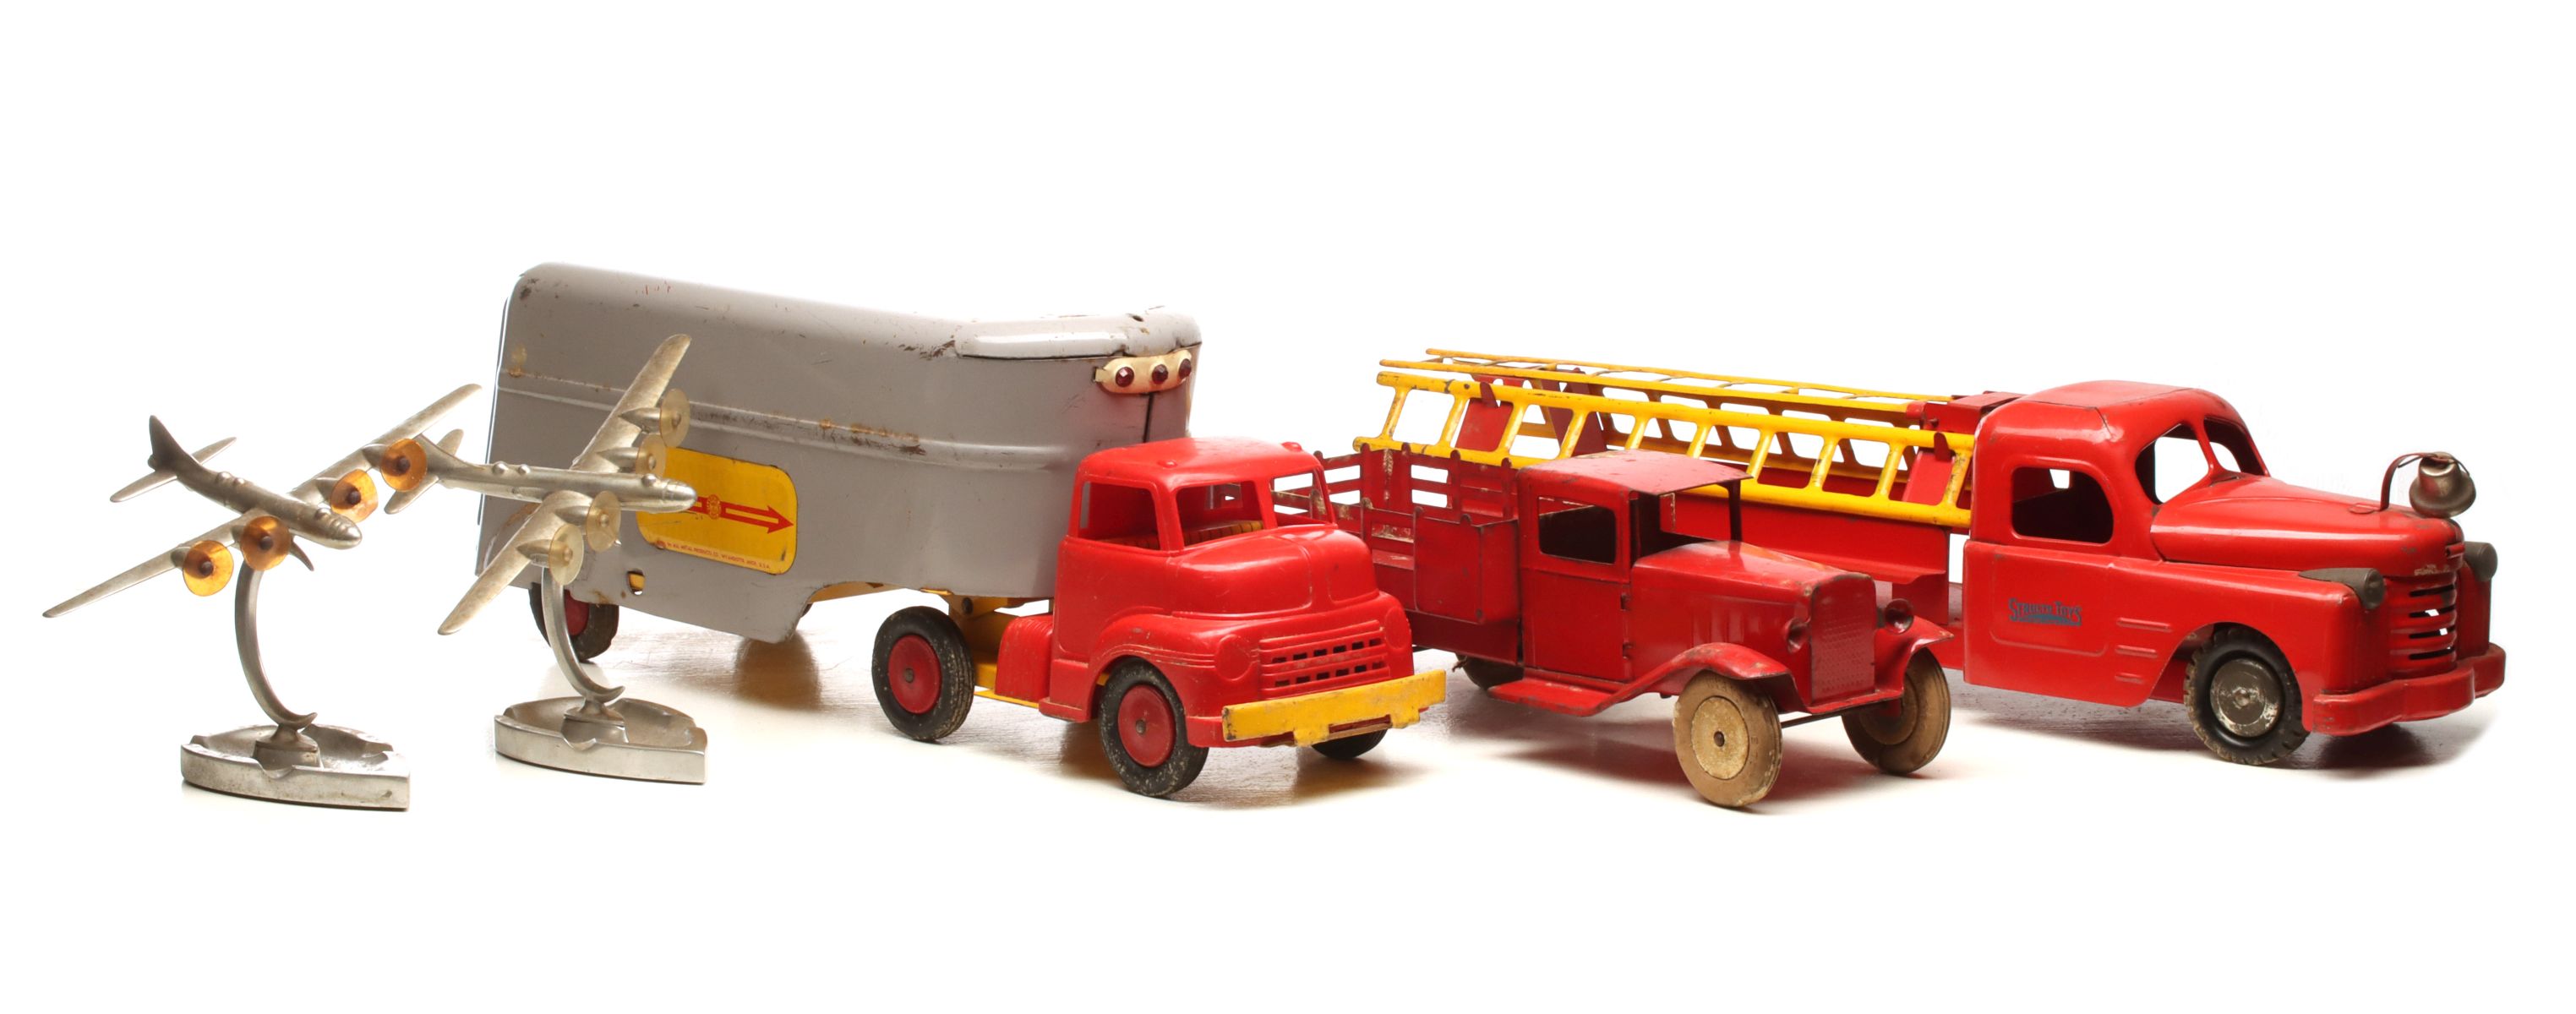 PRESSED STEEL TOY TRUCKS AND ADVANCE BIG MOUTH GUMBALL